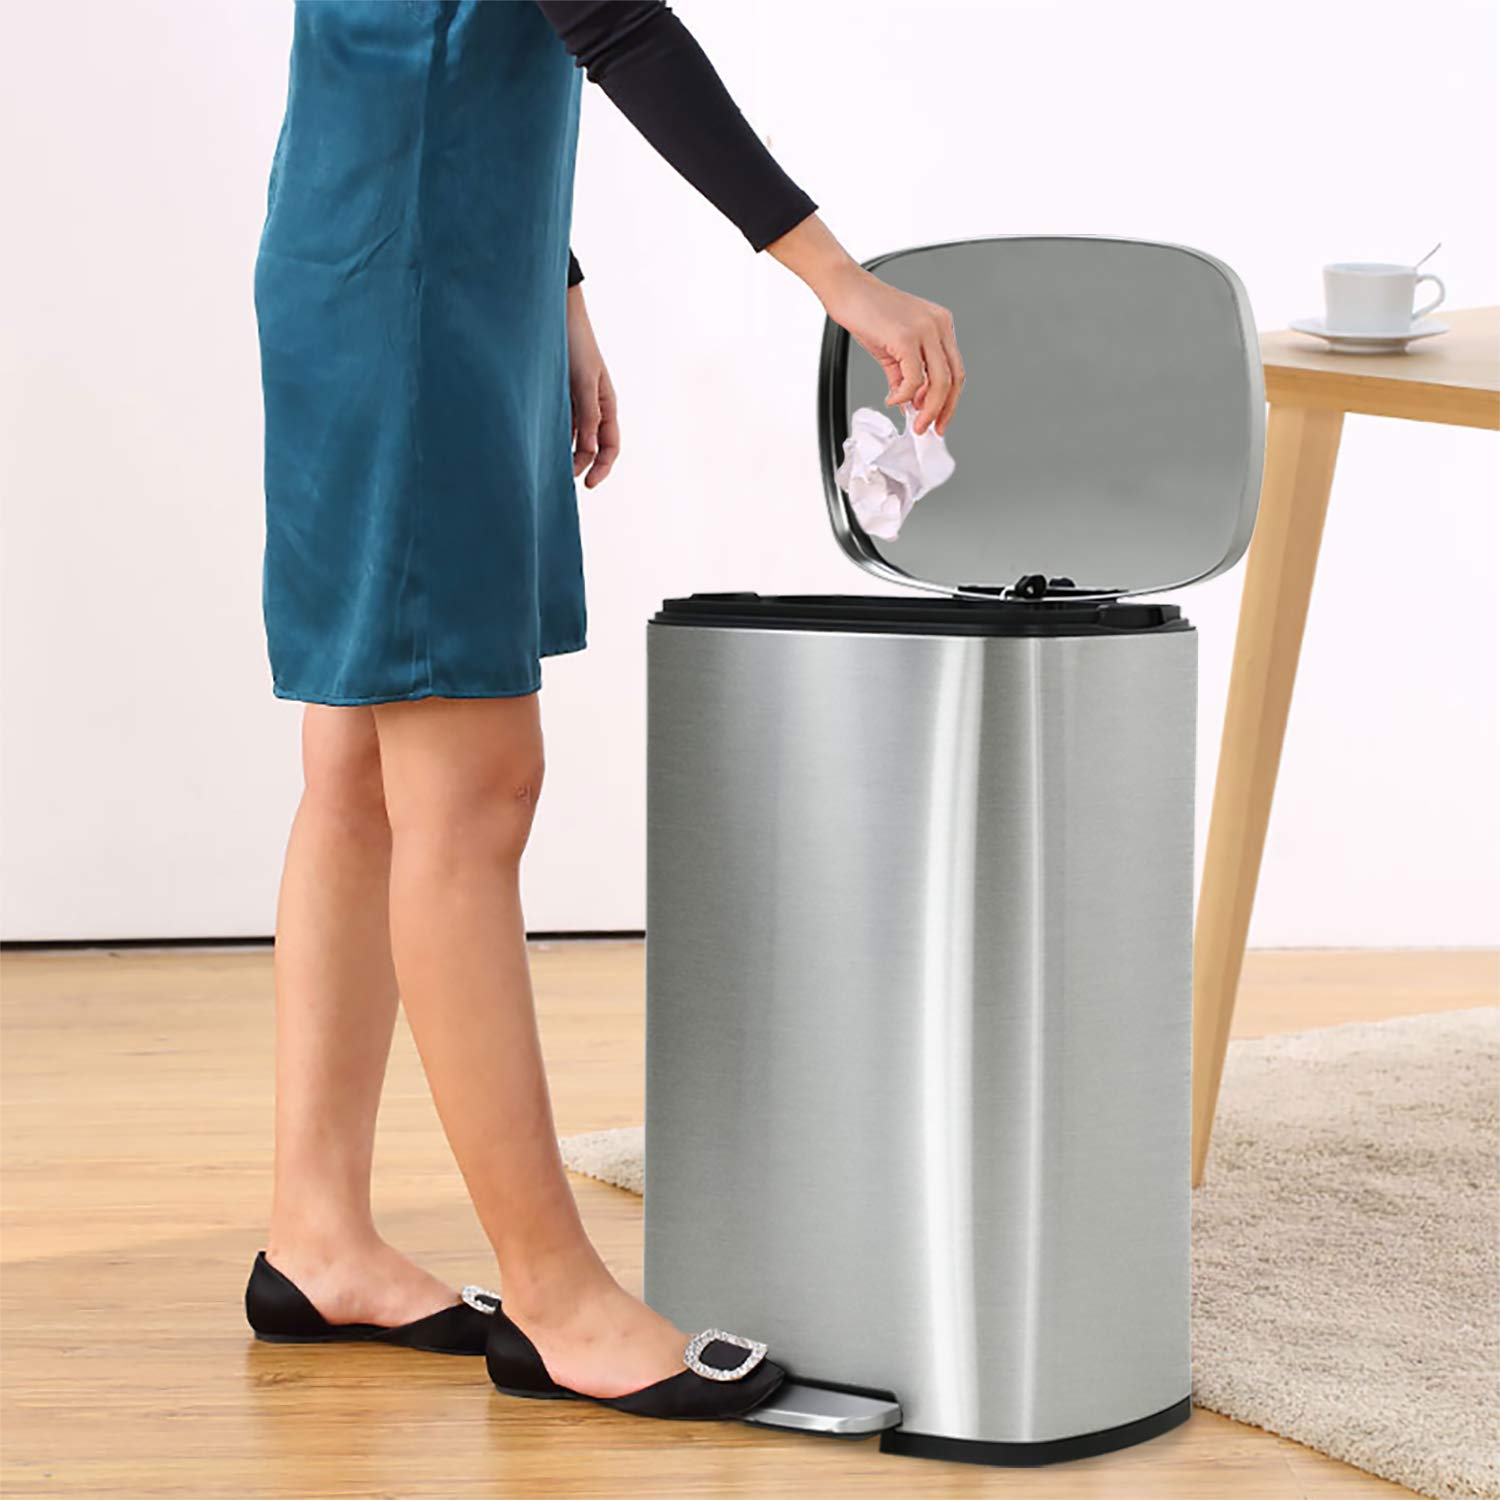 FDW 13 Gallon/50 Liter Gentle Open and Close for Kitchen Trash Can,Stainless Steel - image 3 of 7